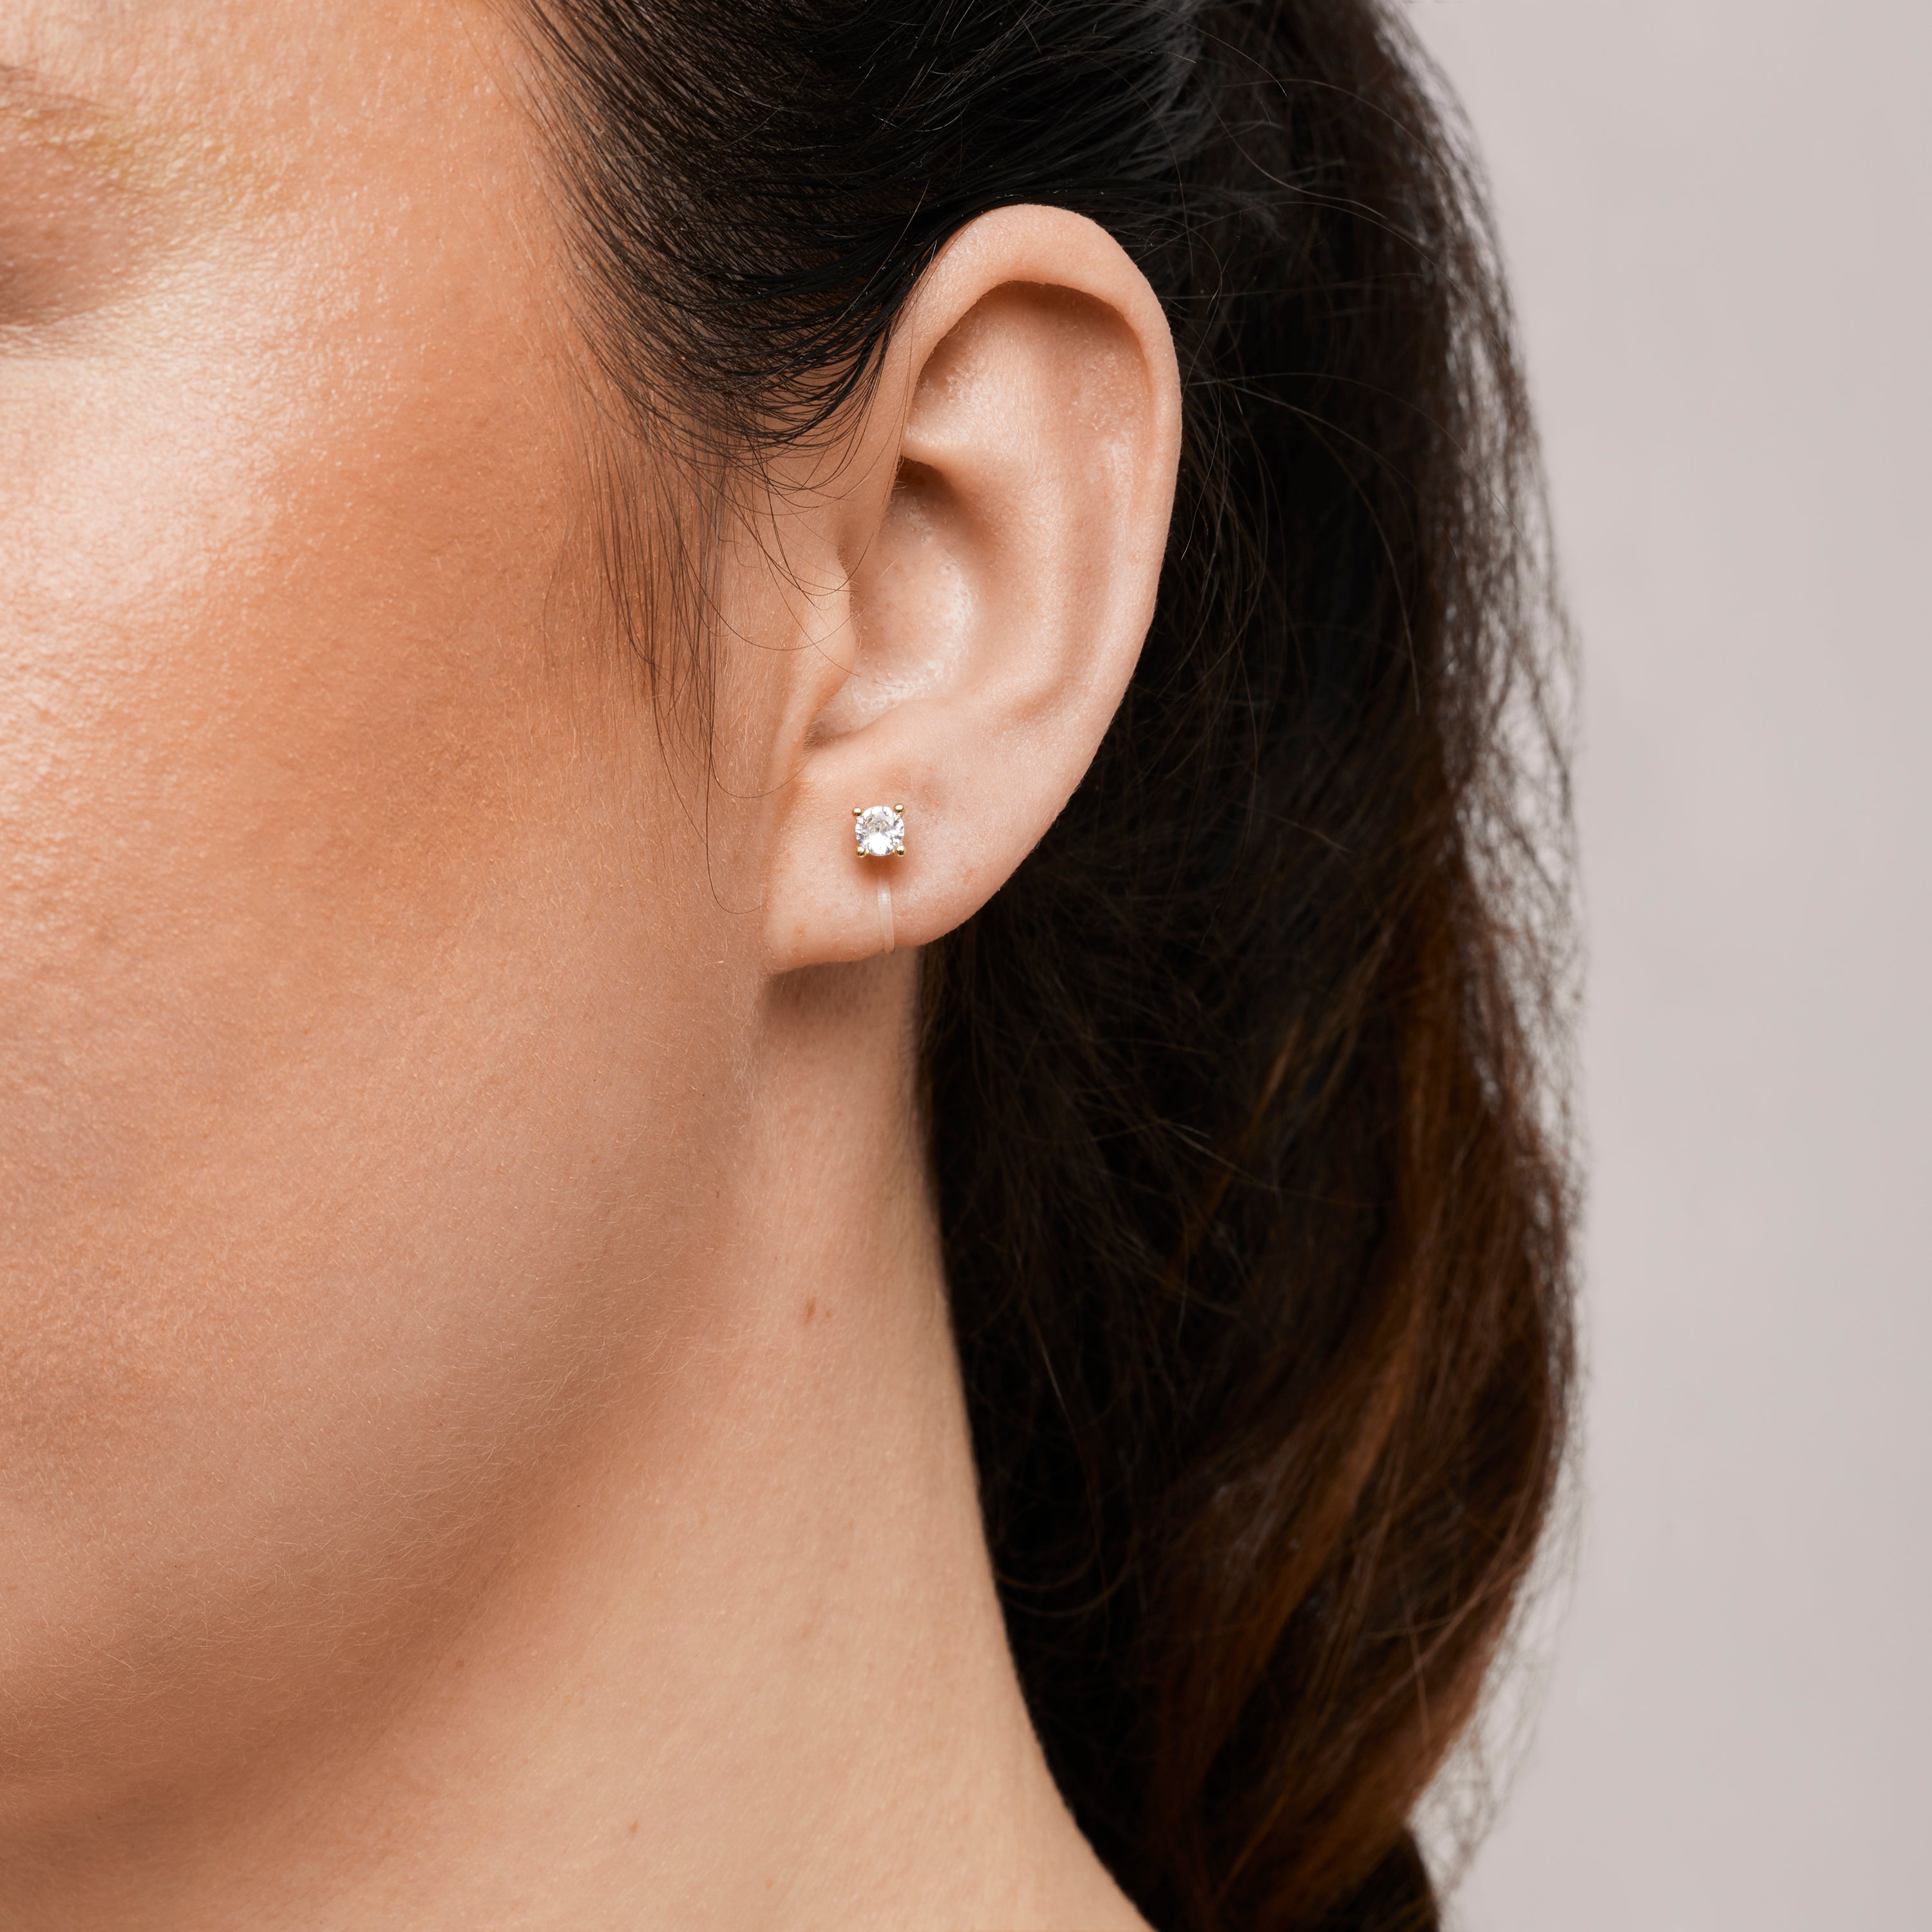 A model wearing the Mini Stud Clip-On Earrings possess a resin clip-on closure, making them suitable for a variety of ear types and offering a medium secure hold for comfortable wear lasting 8-12 hours. Please note that this item is a single pair.